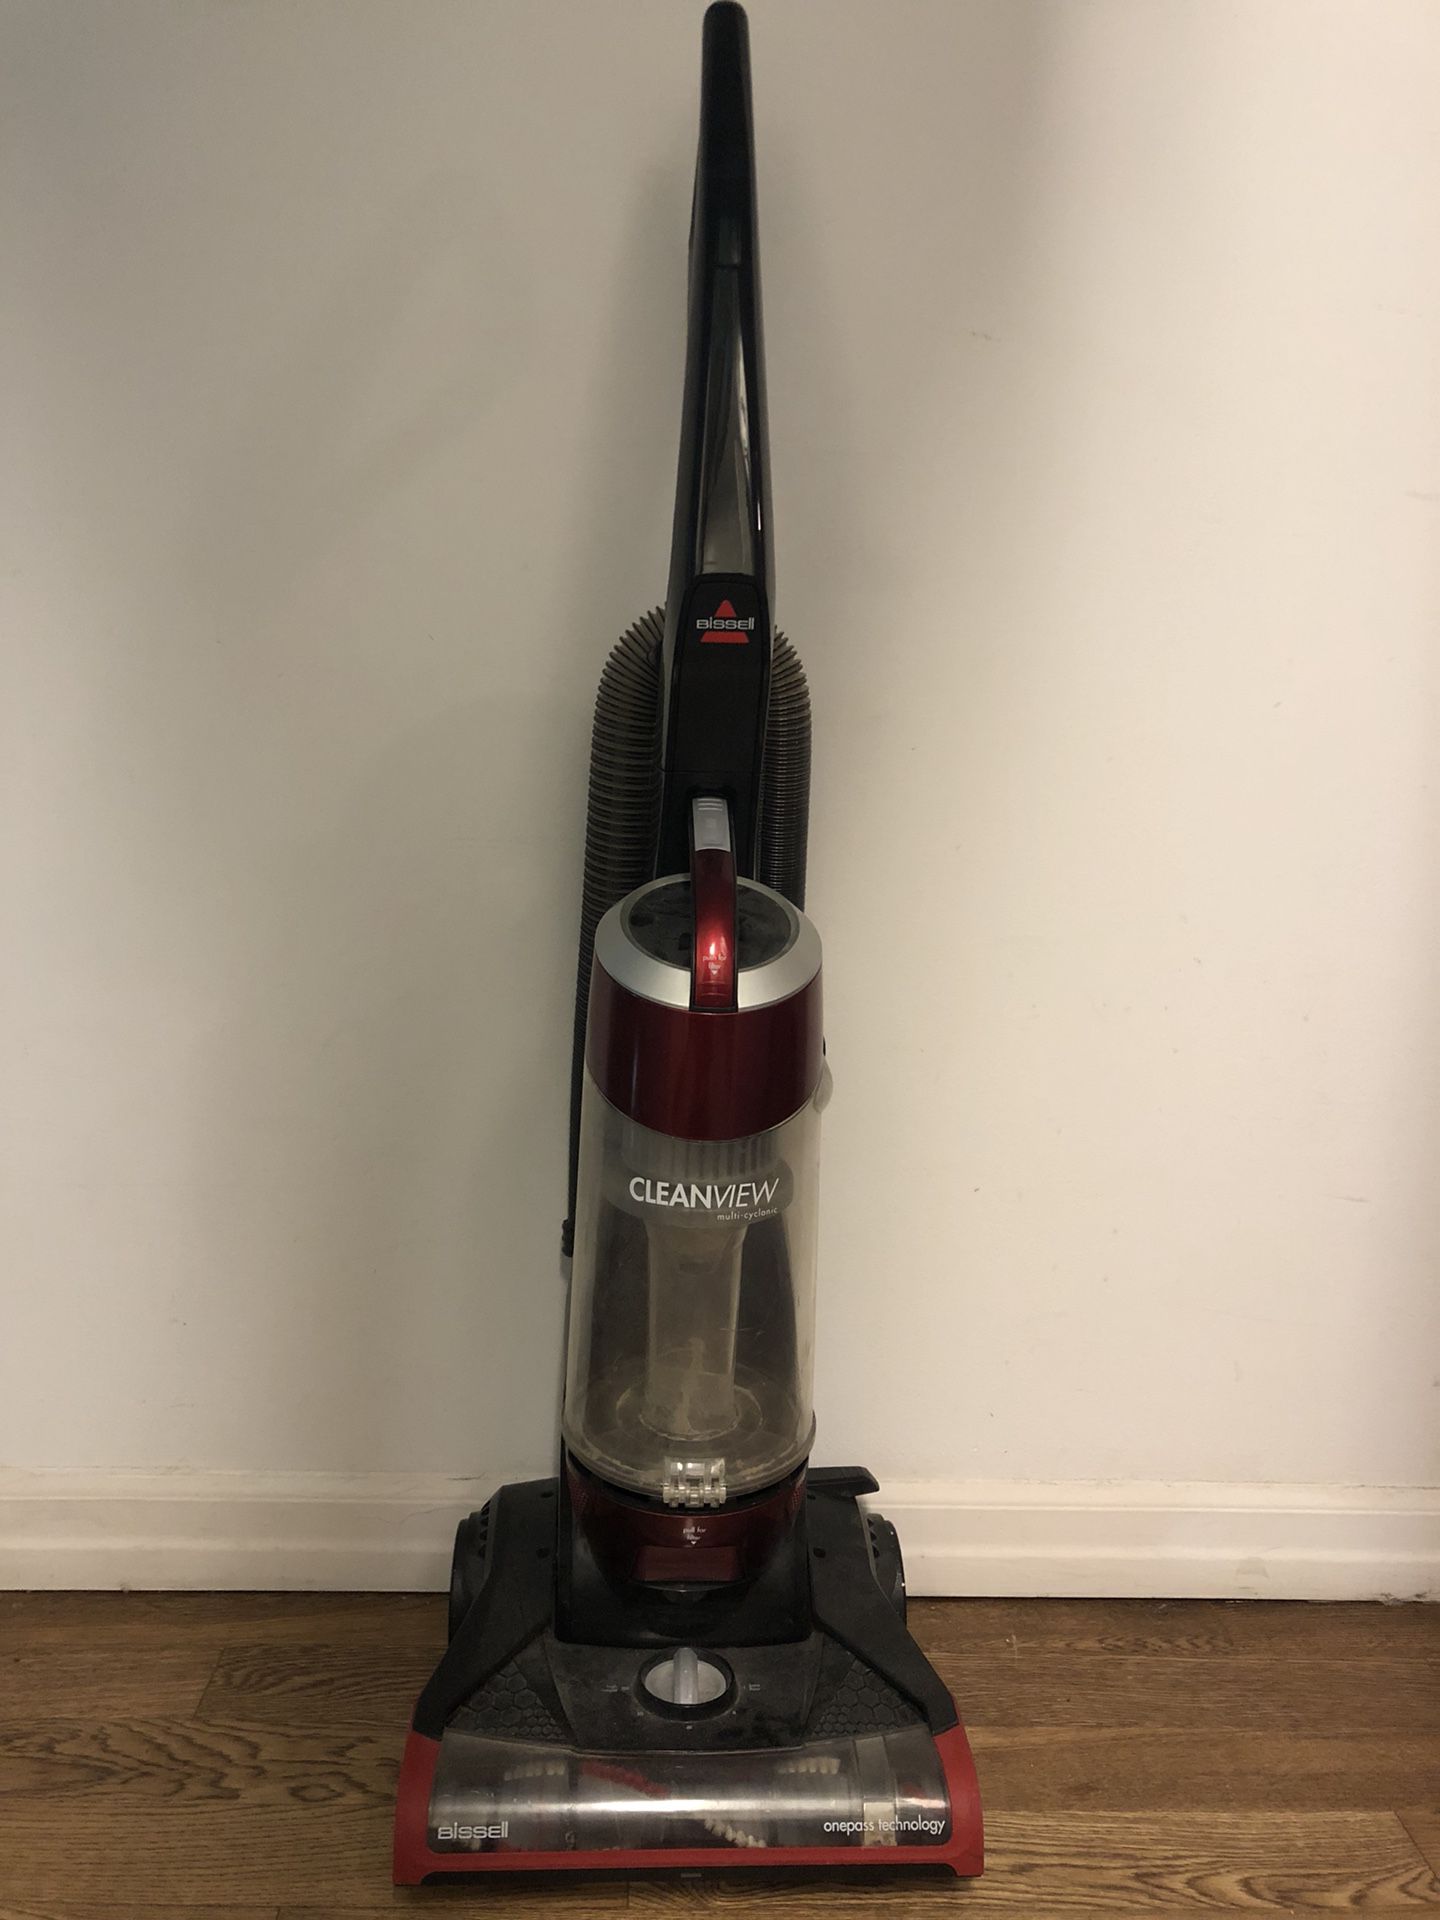 Bissell Cleanview multi-cyclonic vacuum